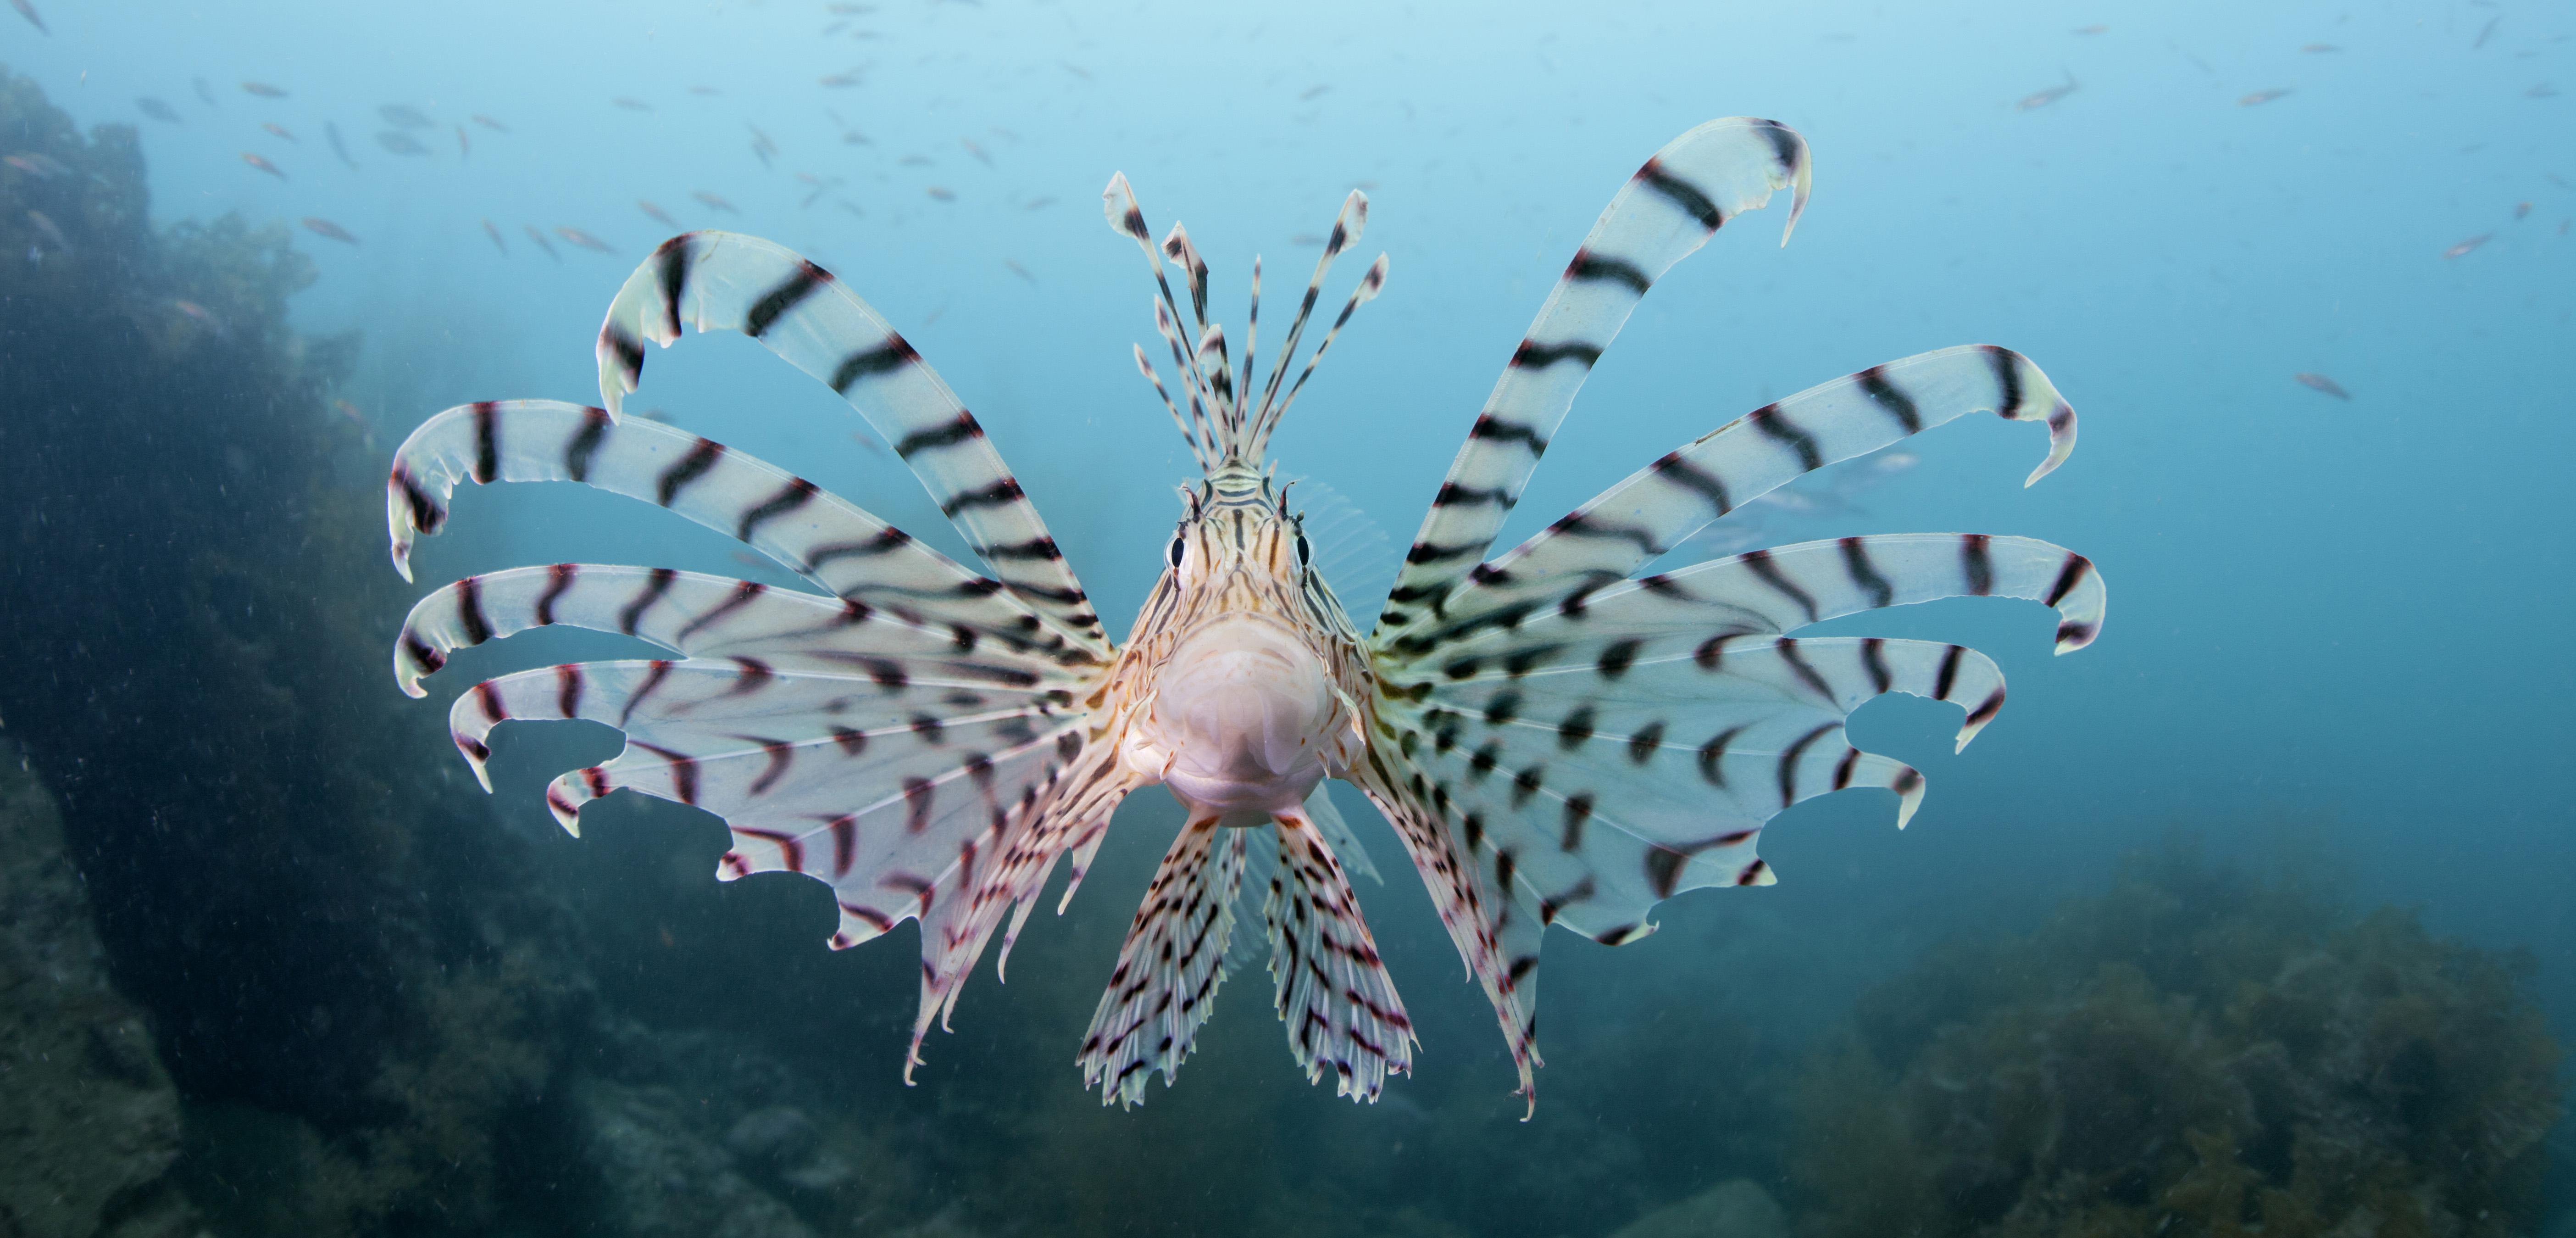 Lionfish, and their pee, may be disrupting the chemical balance of the waters they invade. Photo by Seishi Nakano/Aflo/Corbis